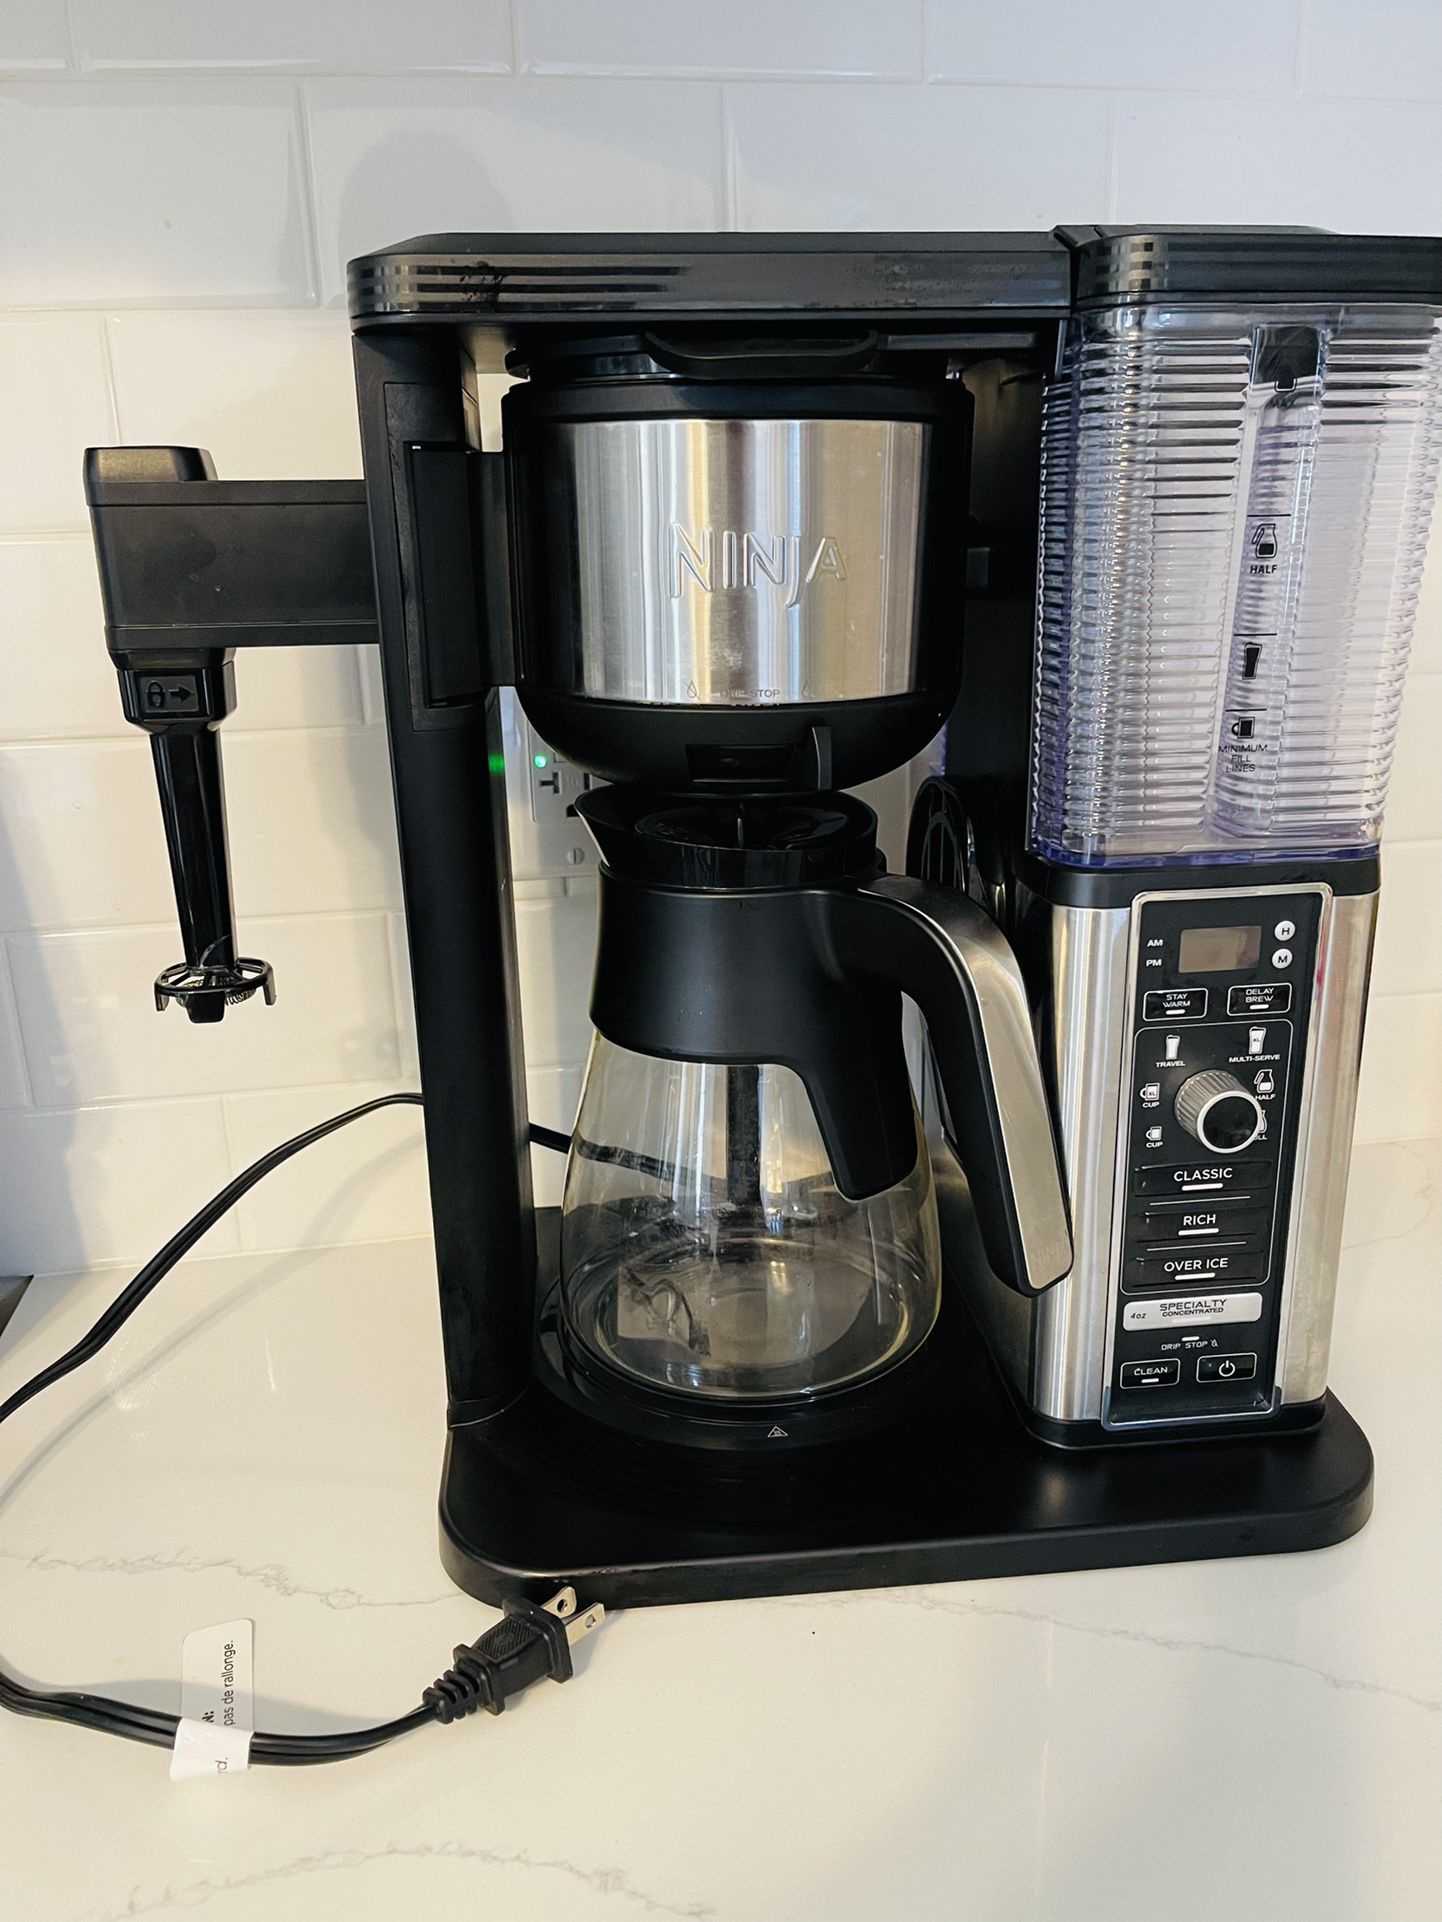 Ninja CM401 Specialty 10-Cup Coffee Maker, with 4 Brew Styles for Ground  Coffee, Built-in Water Reservoir, Fold-Away Frother & Glass Carafe, Black  for Sale in Mount Vernon, NY - OfferUp